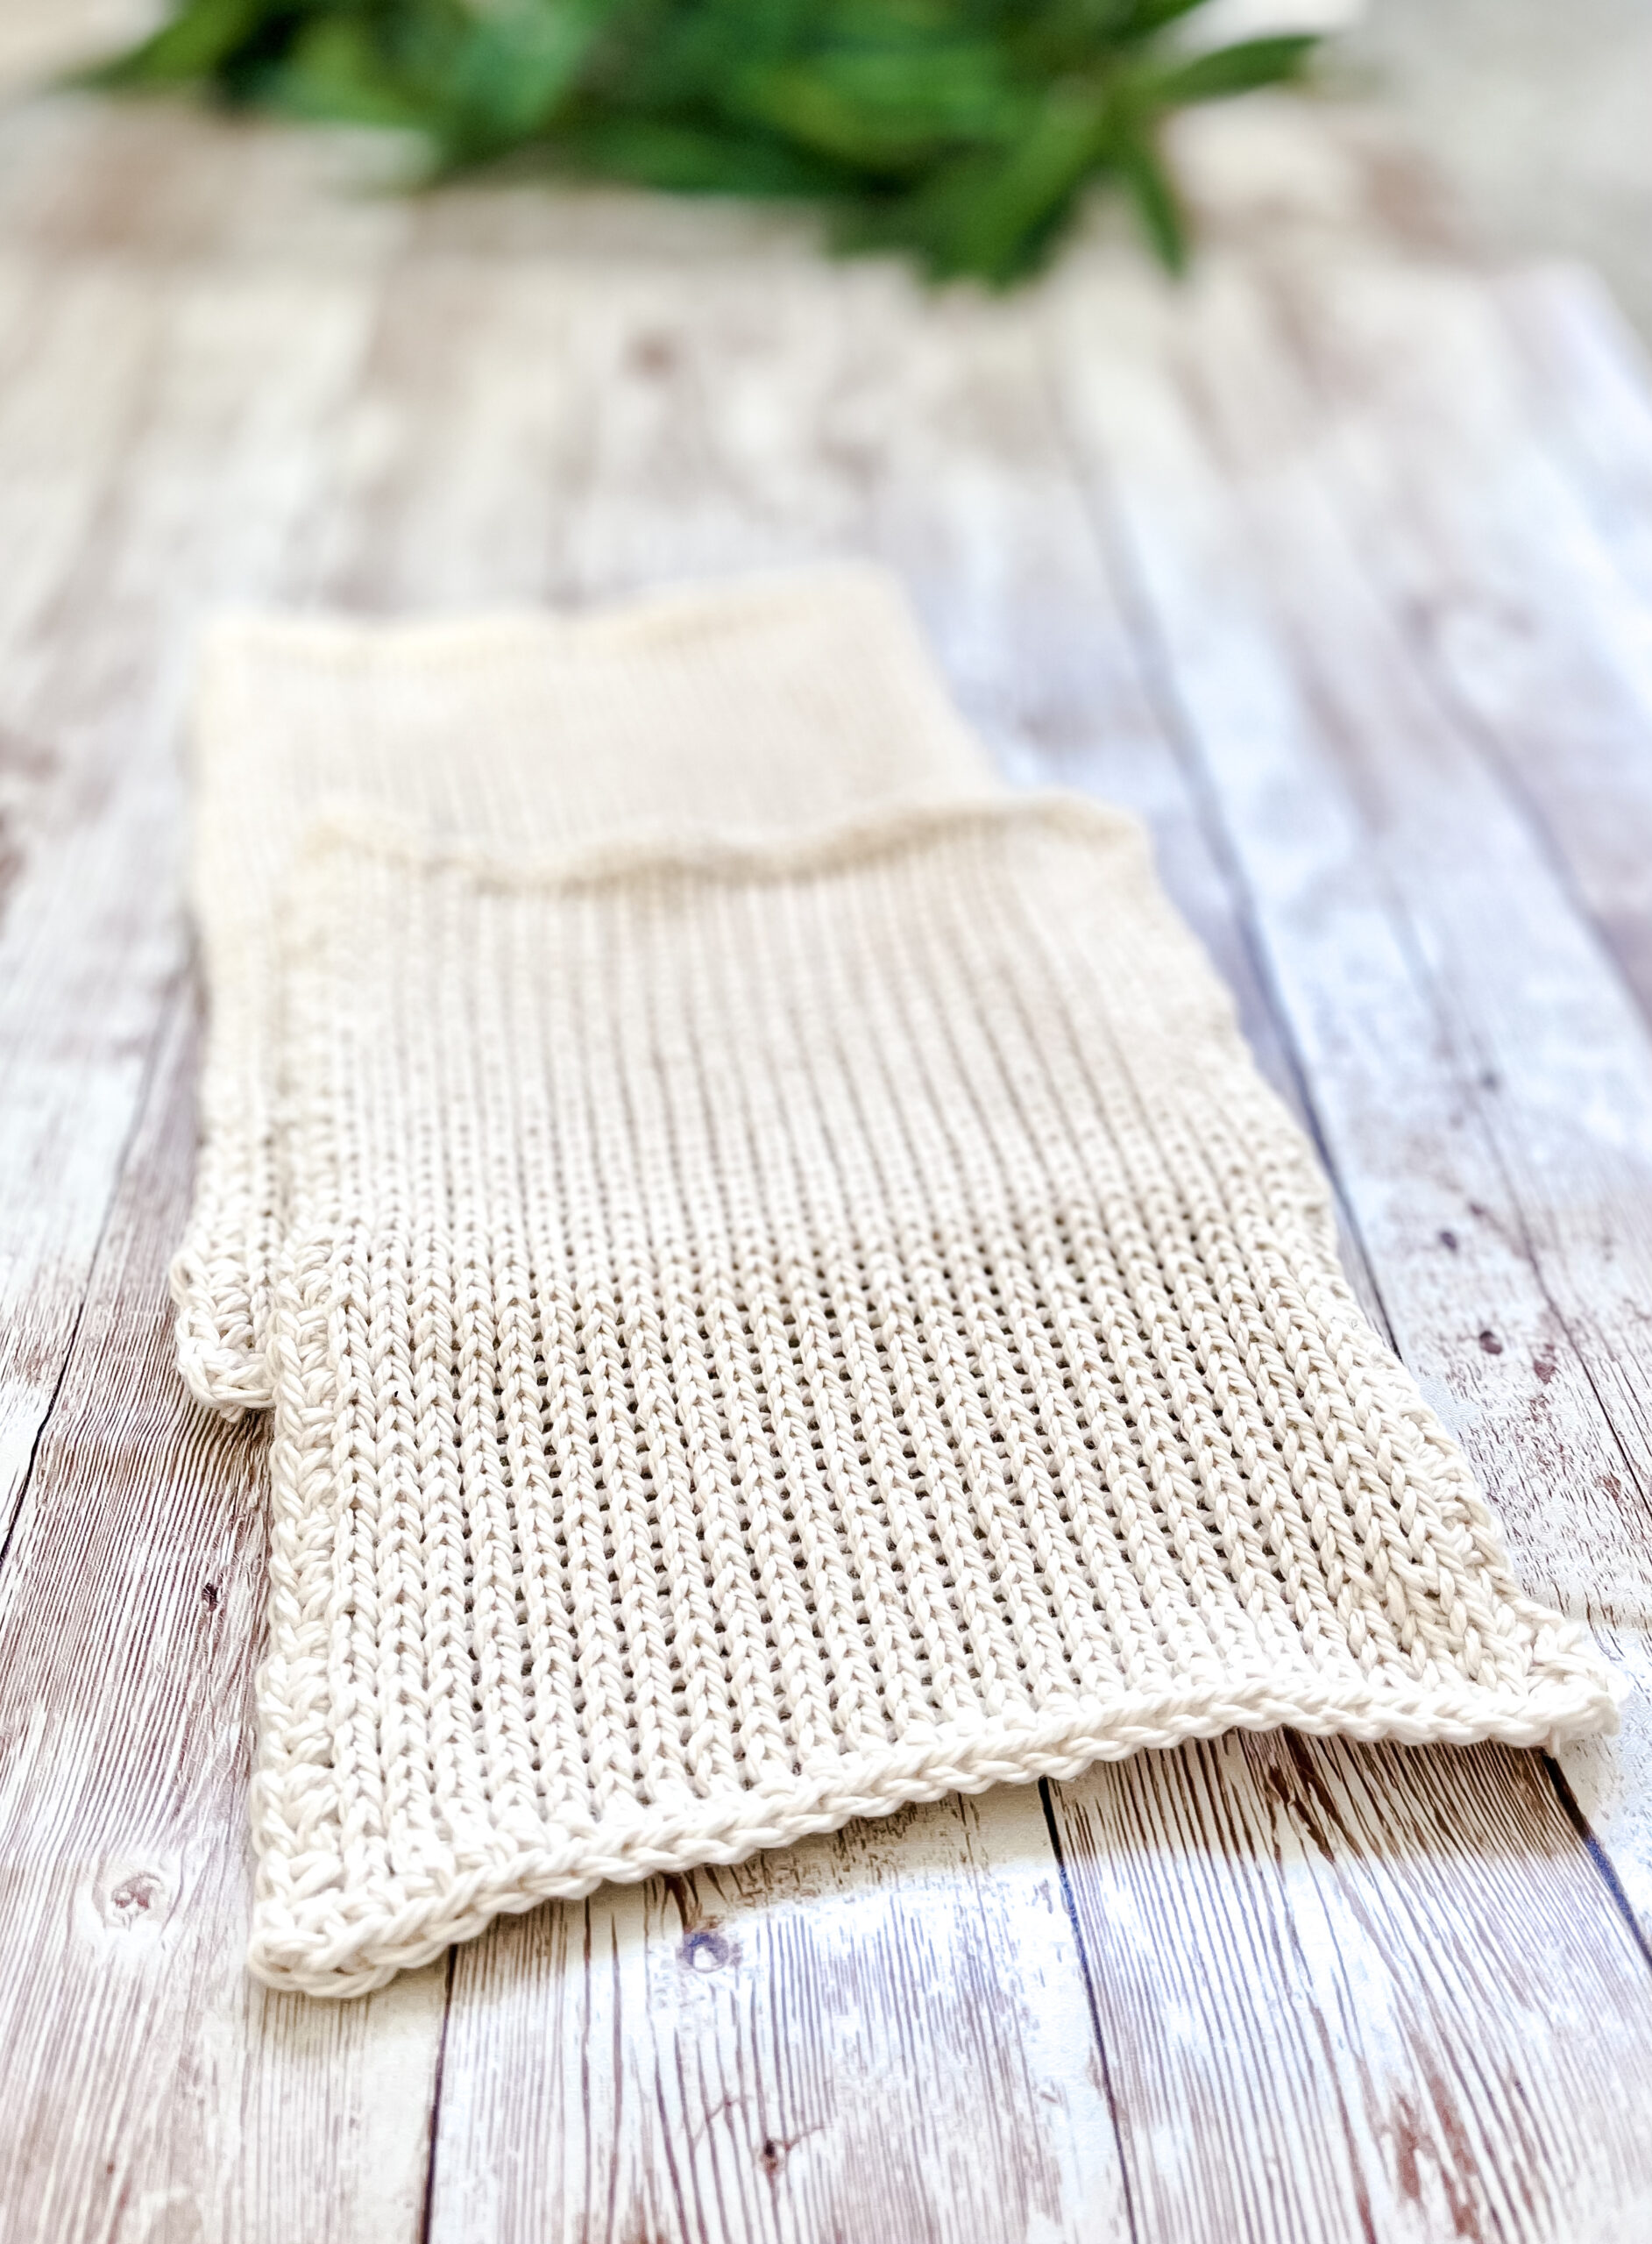 A pair of white Virginia-grown cotton washcloths rests on a wood plank